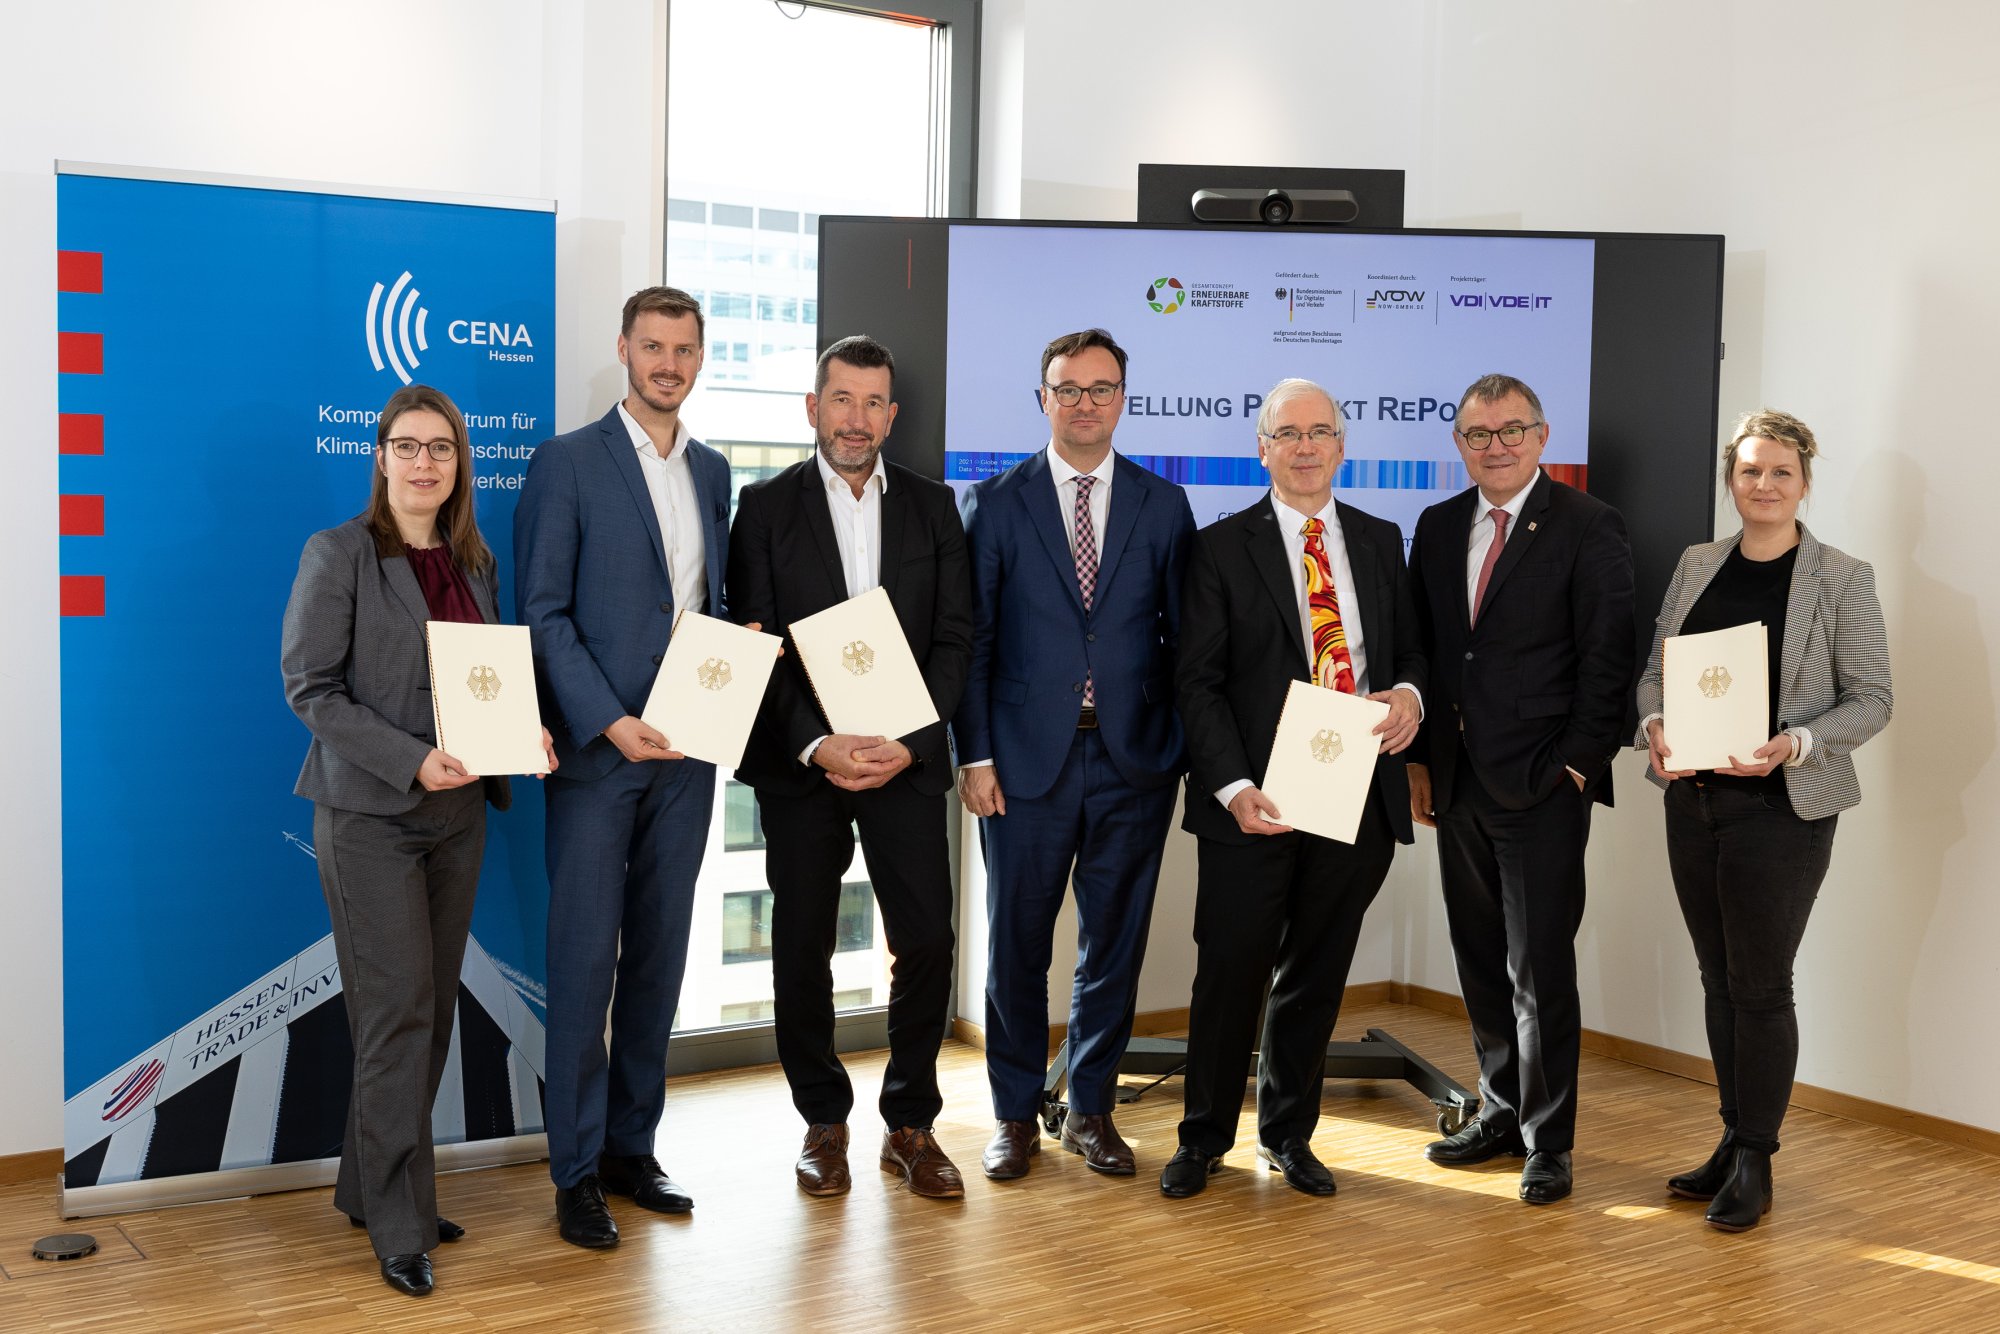 3.4 million euros funding commitment for RePoSe e-fuel project in Hesse